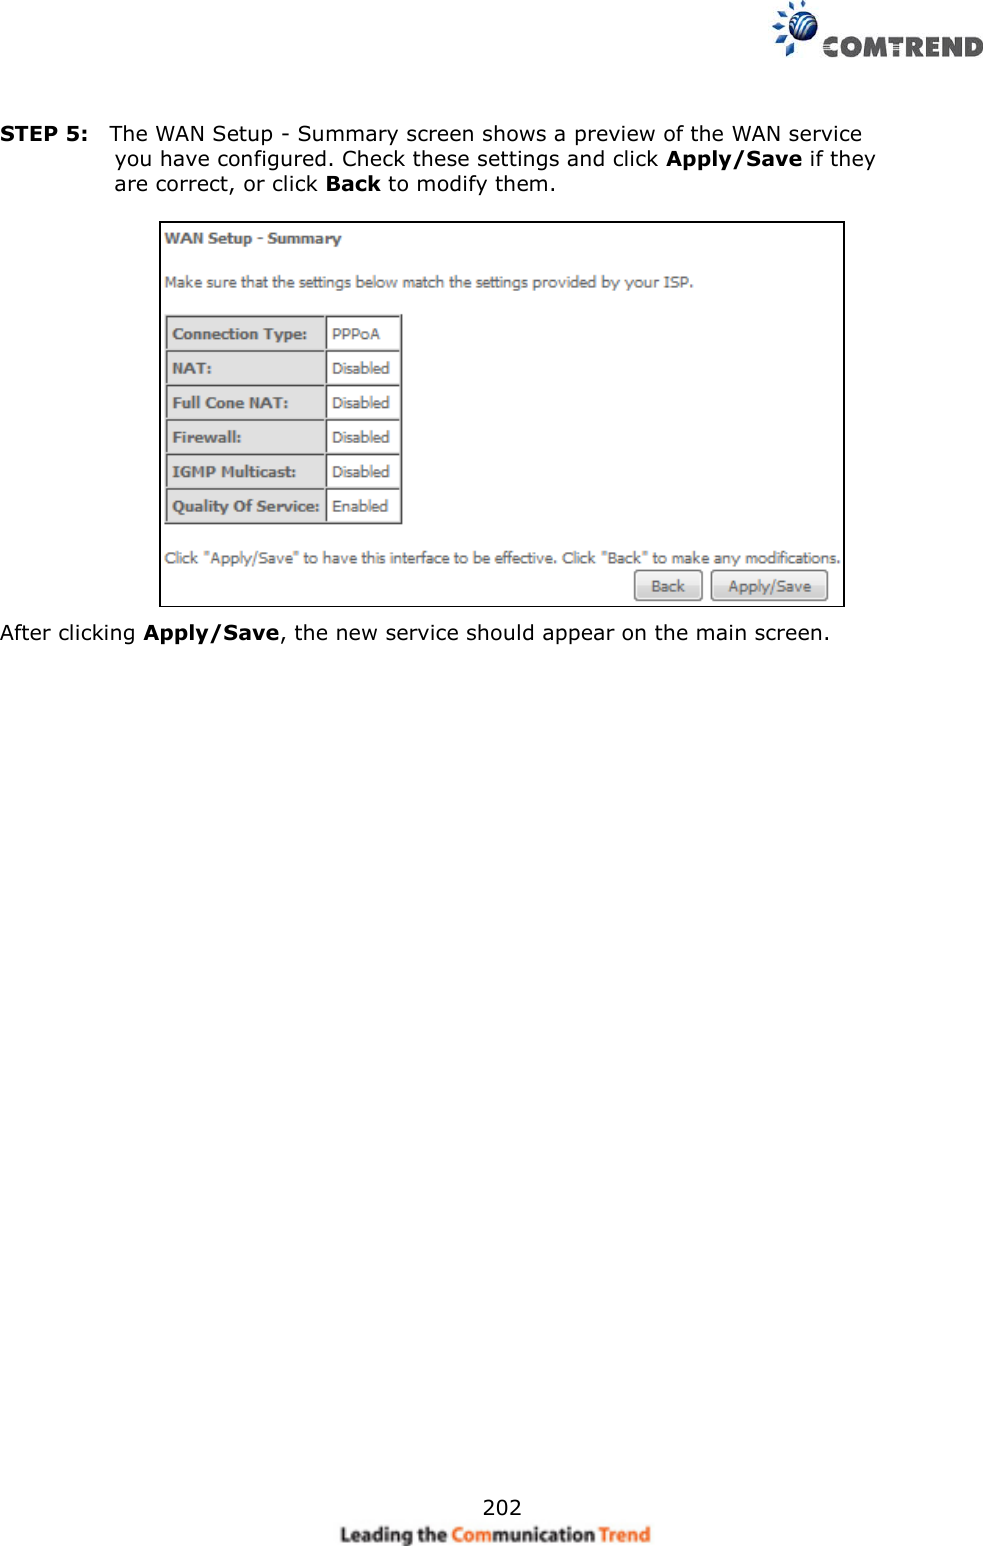     202  STEP 5:  The WAN Setup - Summary screen shows a preview of the WAN service                         you have configured. Check these settings and click Apply/Save if they                         are correct, or click Back to modify them.   After clicking Apply/Save, the new service should appear on the main screen.        